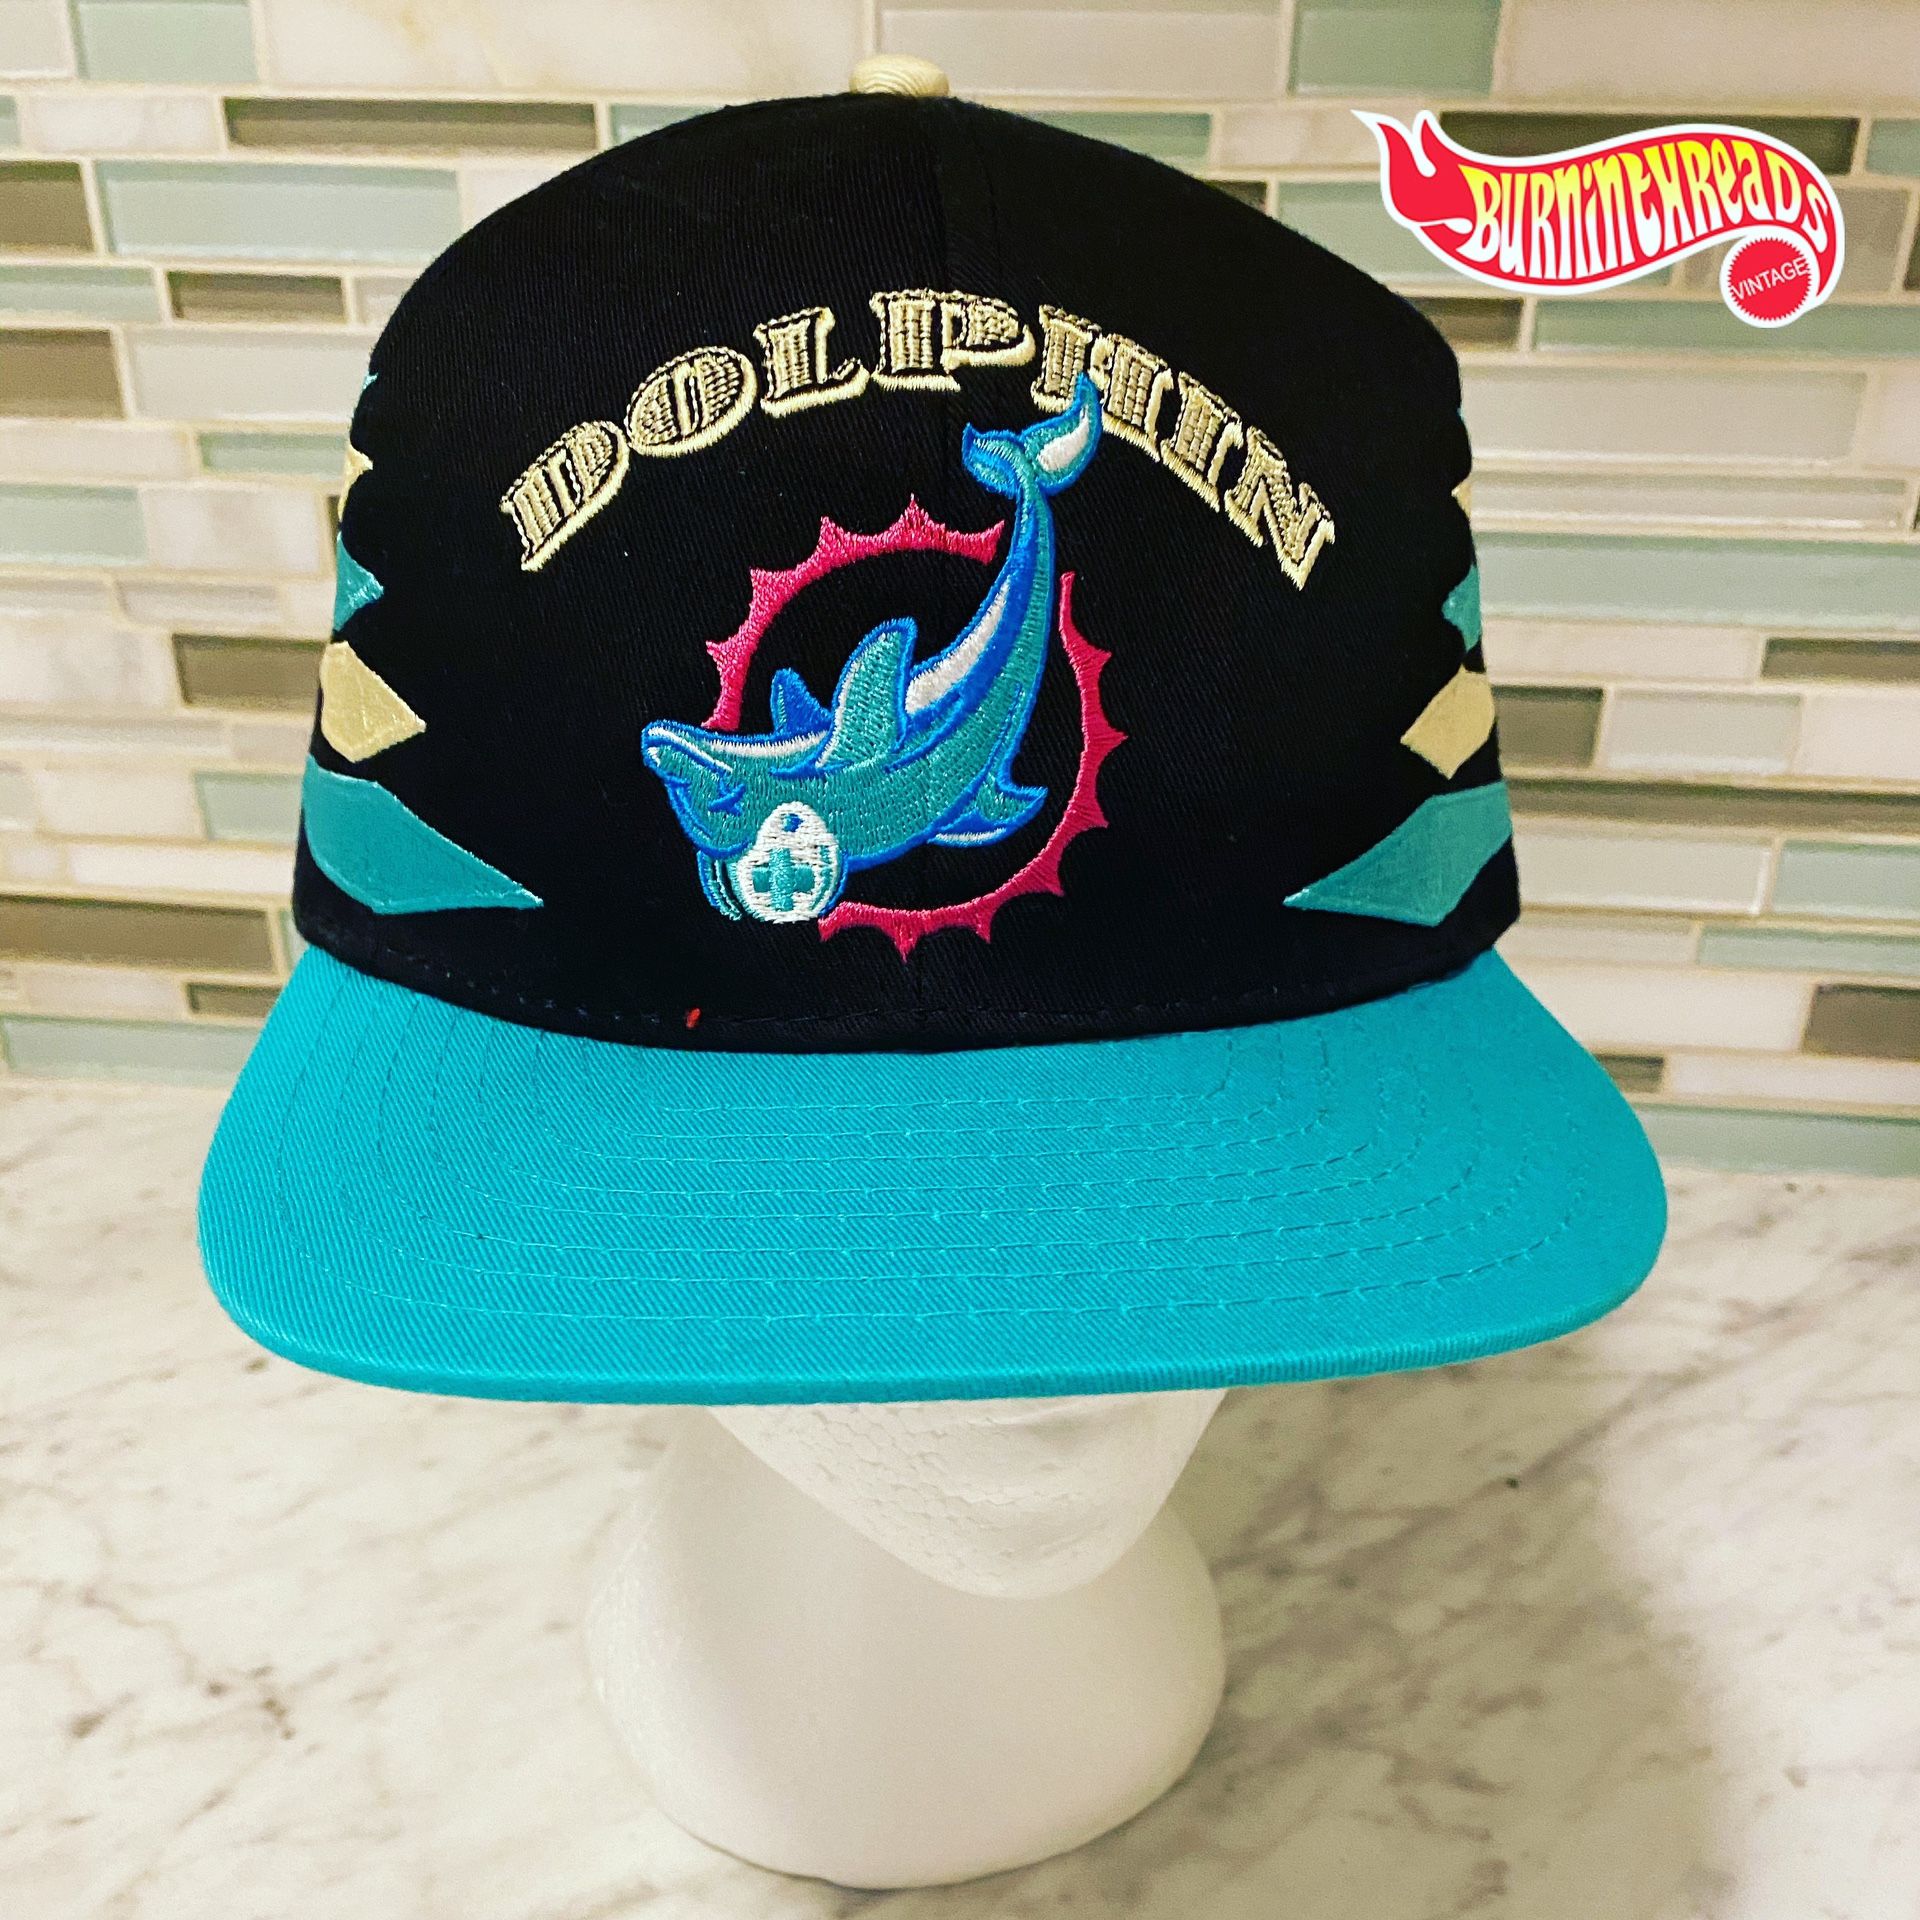 Pink Dolphin Recall Banned Miami Dolphins Black Snapback Hat Cap Rare Great Cond